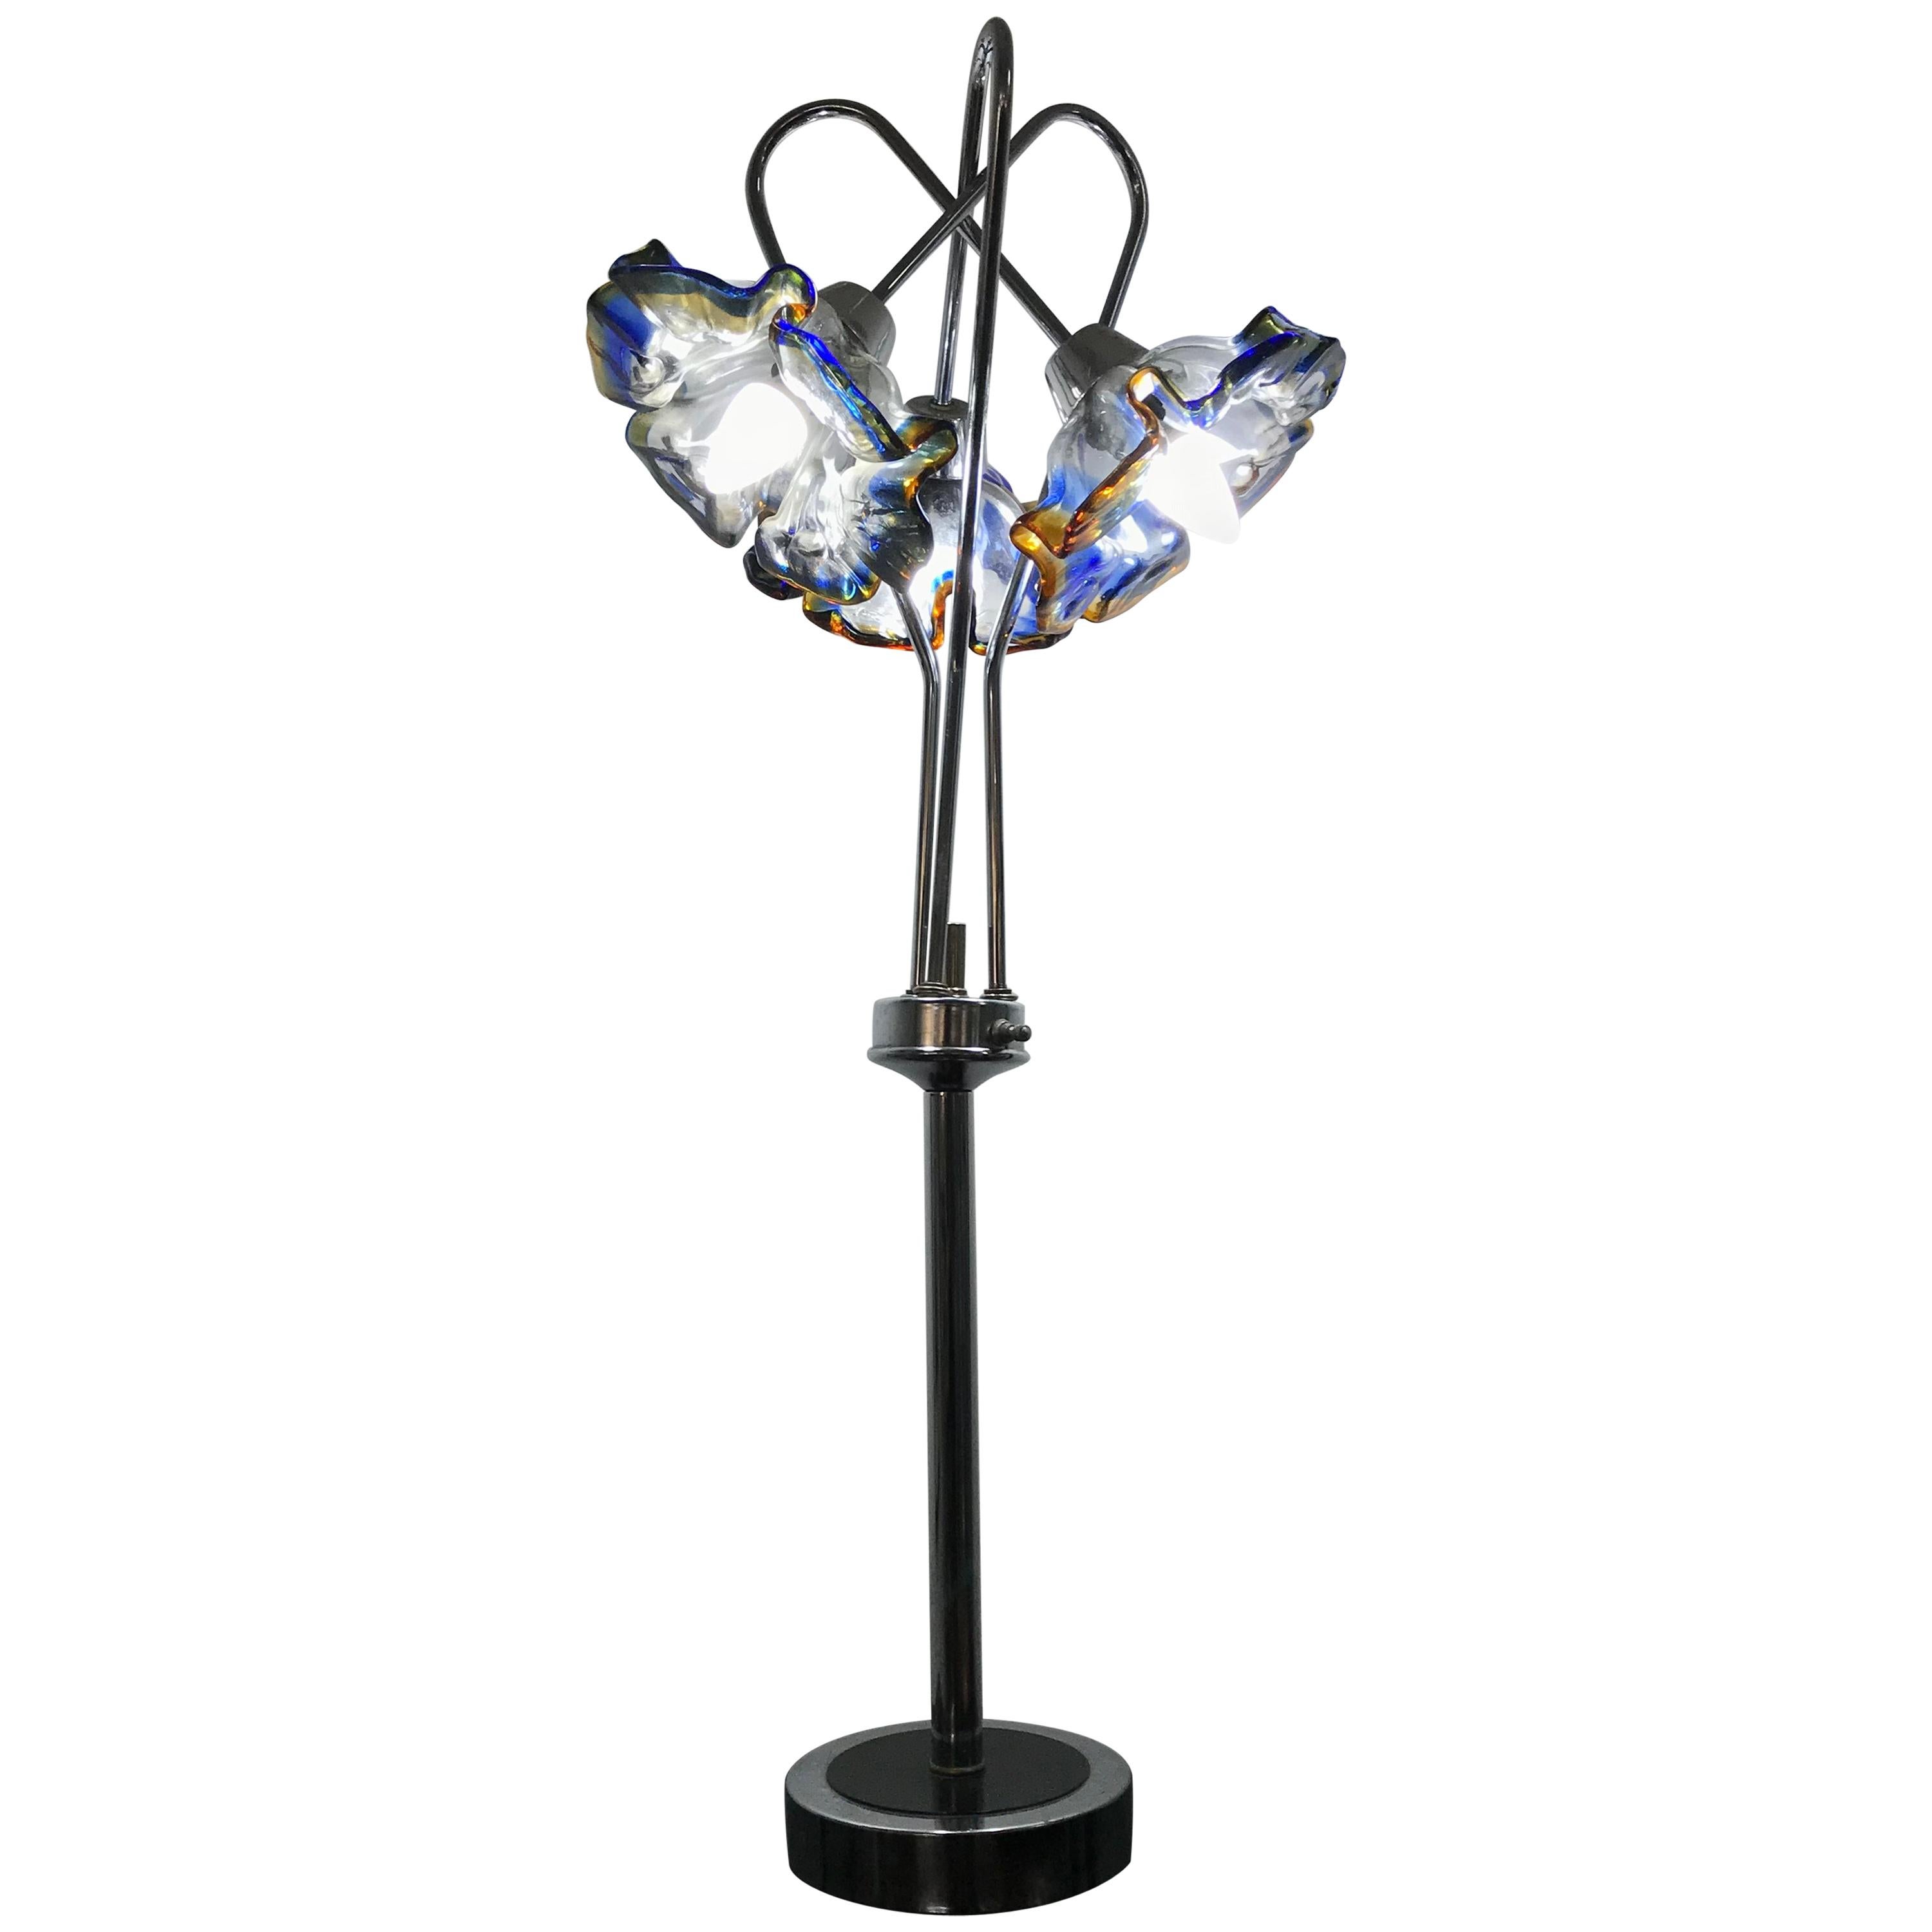 Mid-Century Modern Table Lamp by Mazzega in Murano Glass and Chrome, circa 1970